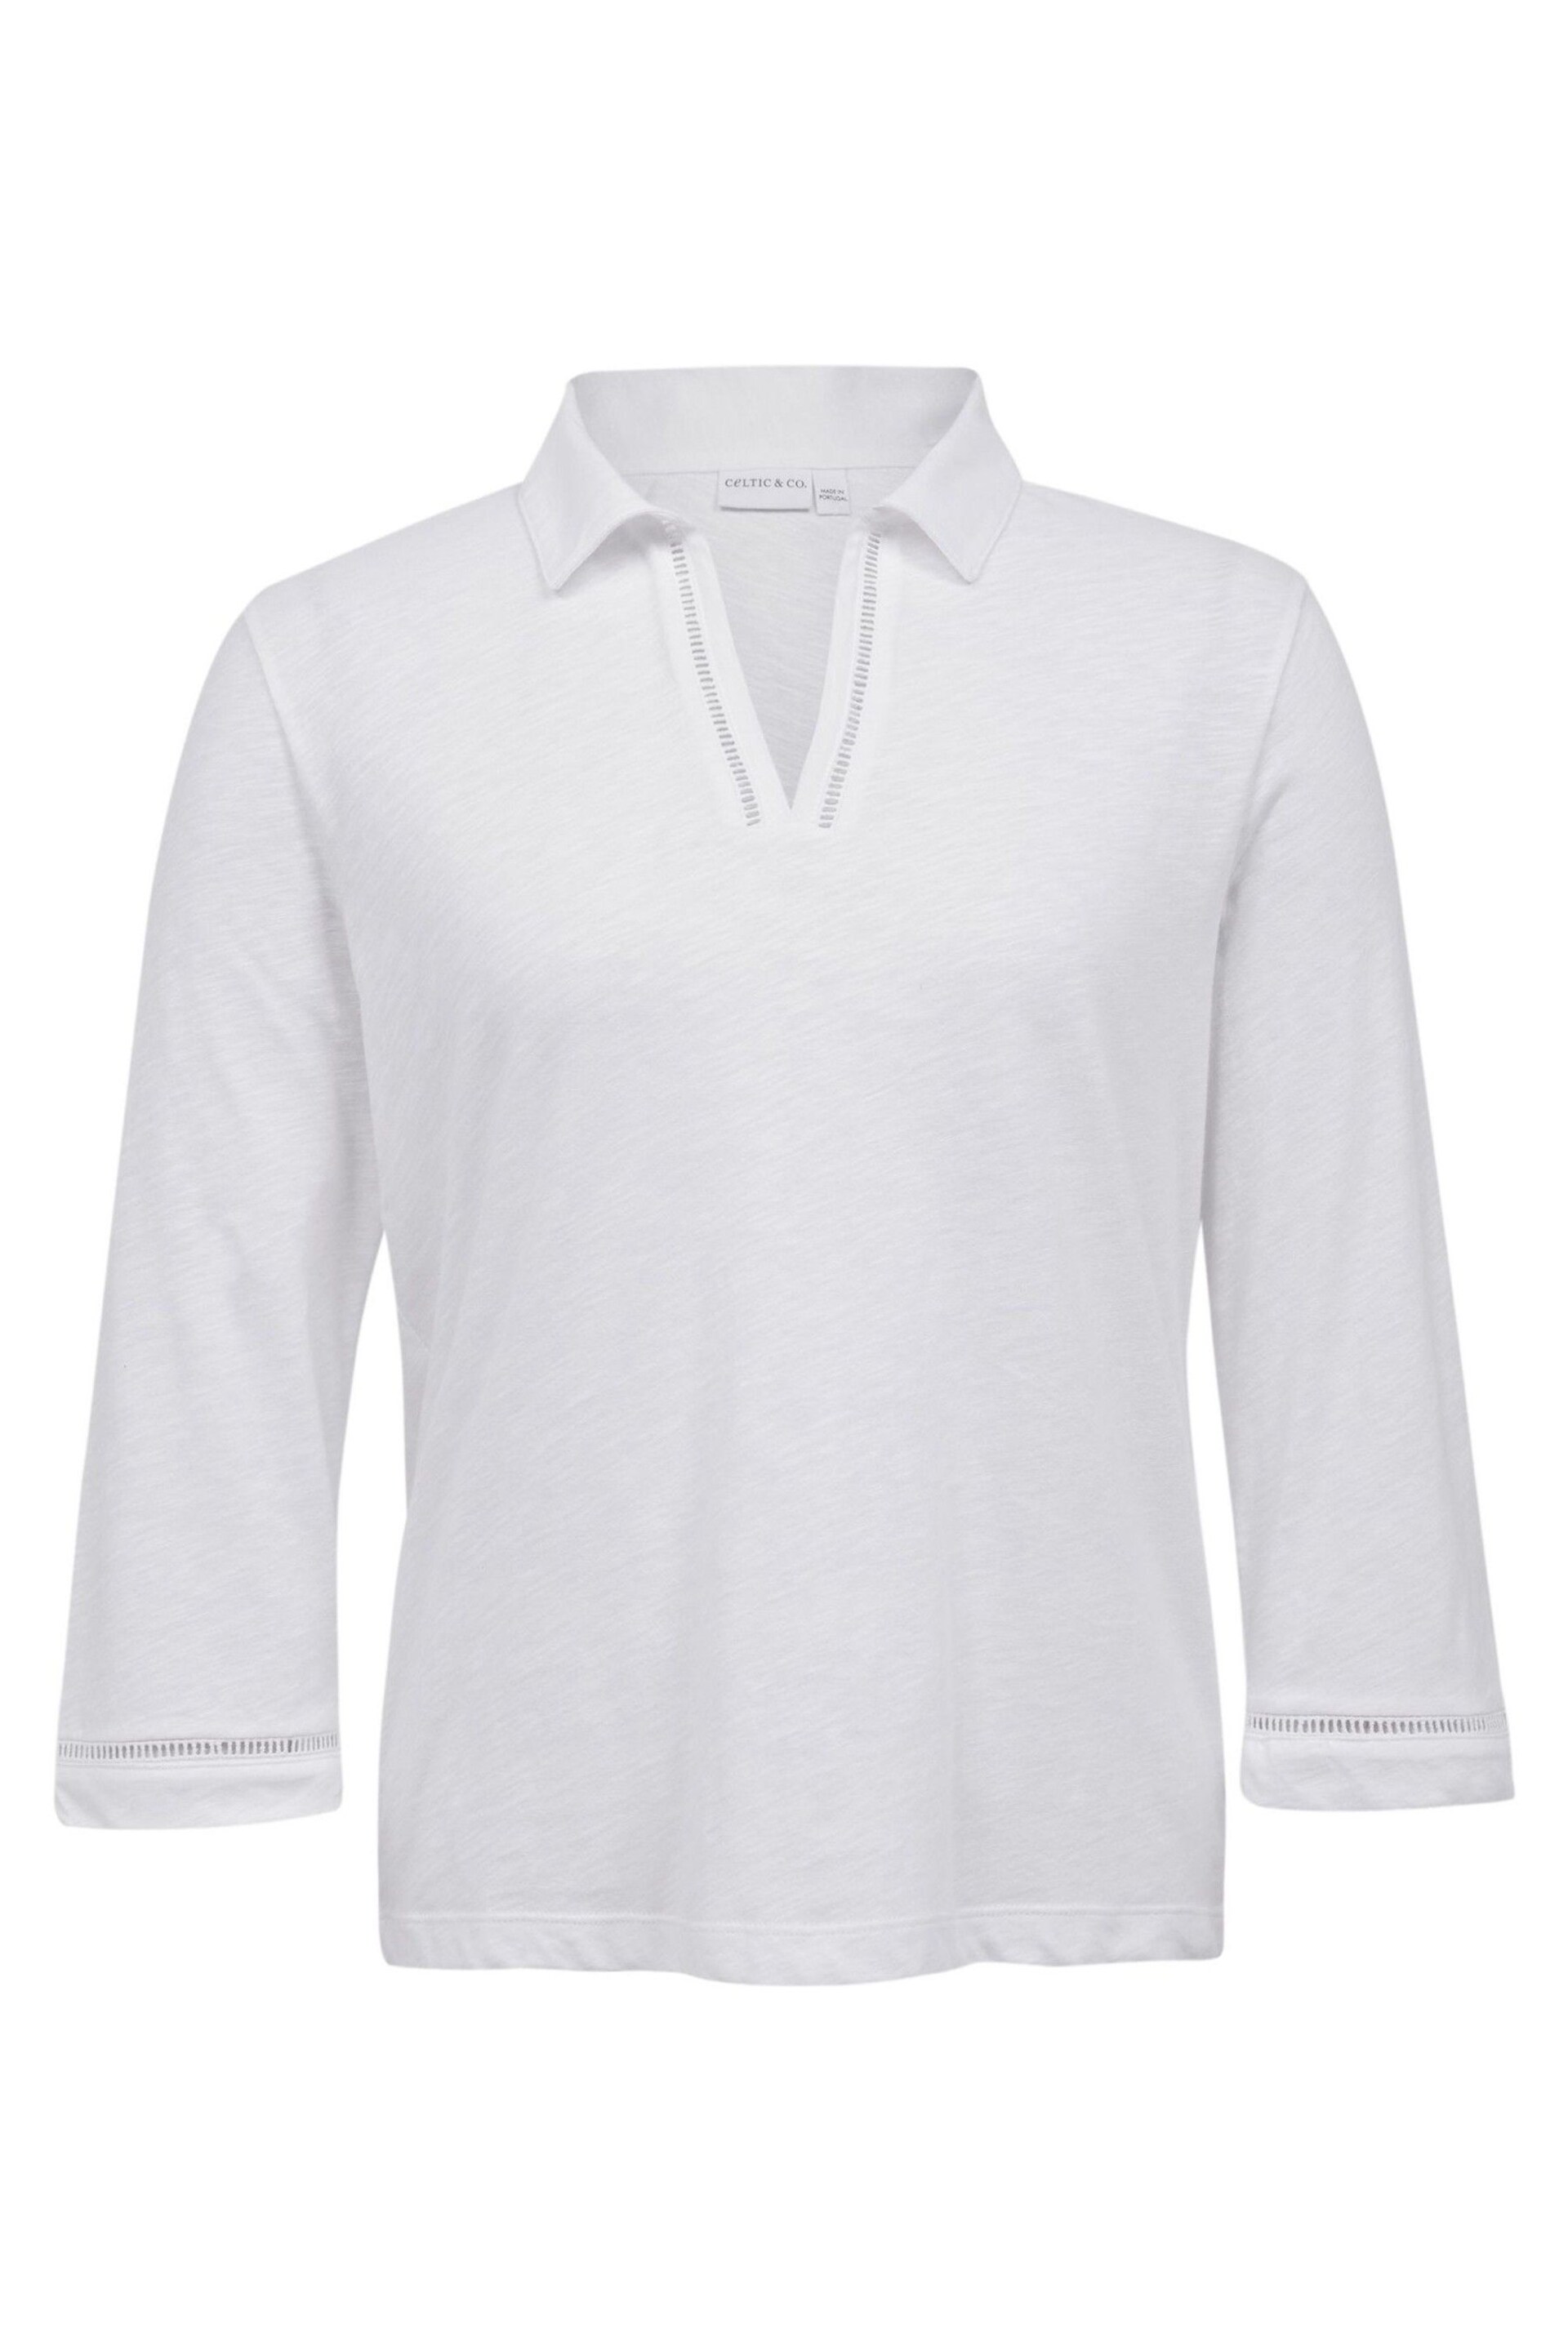 Celtic & Co. Organic Cotton Jersey Trim Detail White Polo Top - Image 3 of 5